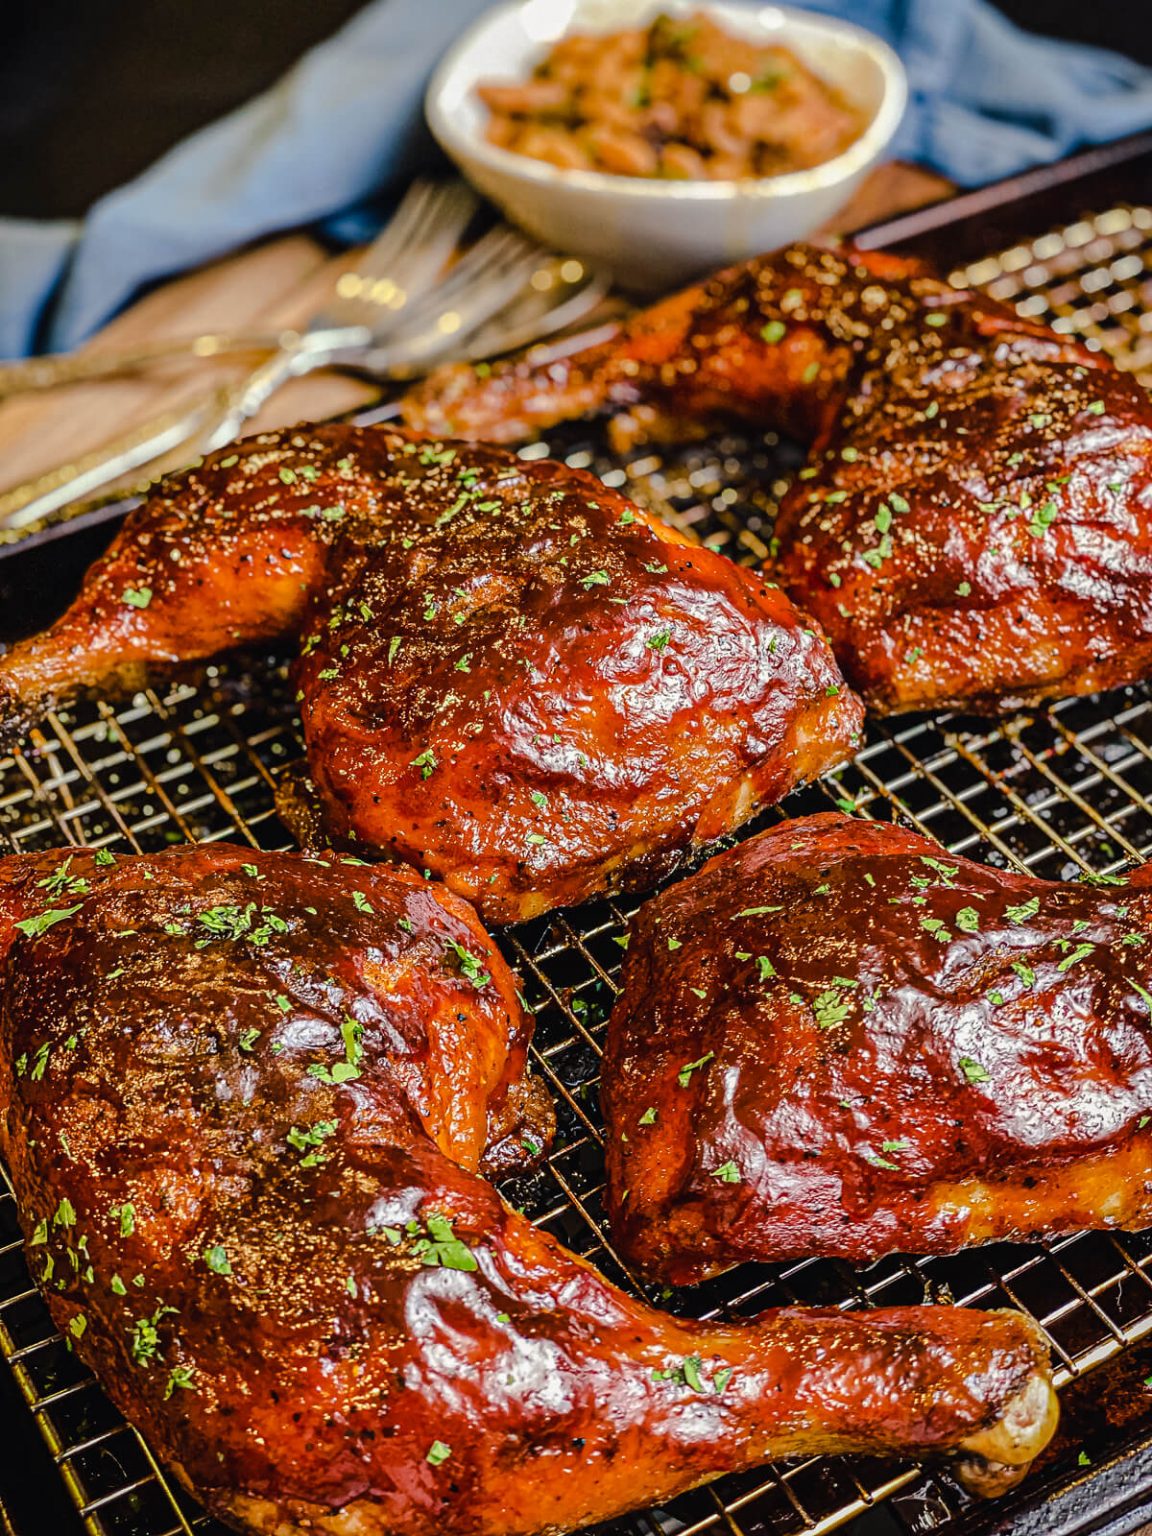 How To Grill Chicken Quarters Outdoor Recipes - Grillseeker